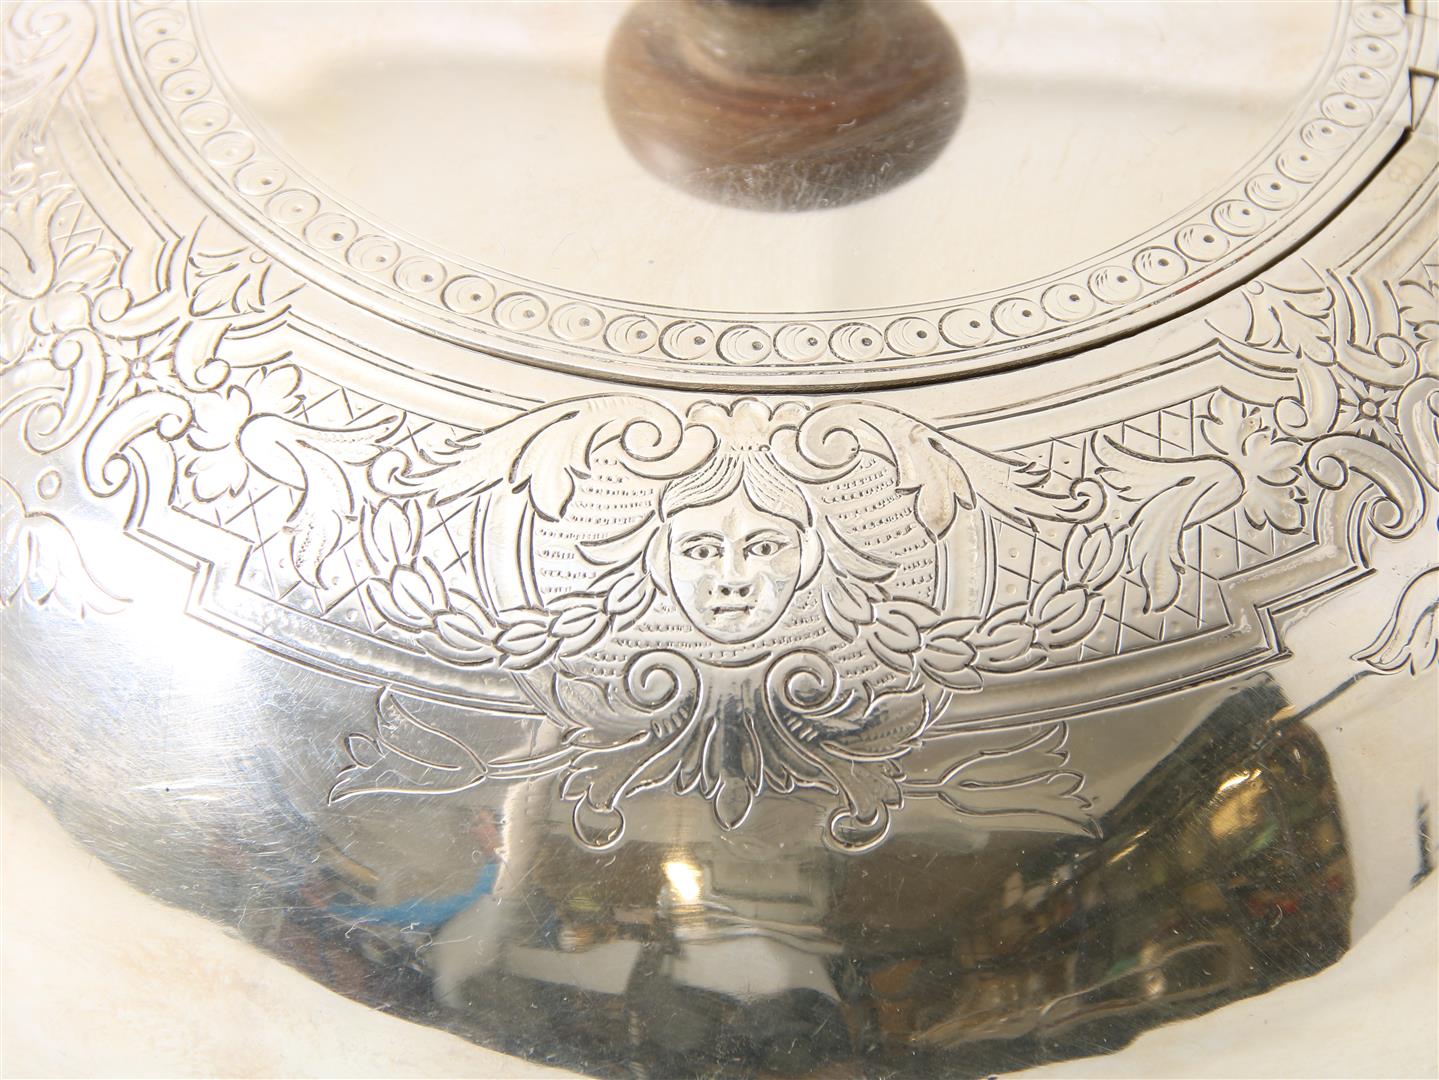 Silver teapot with wooden handle, decorated with floral vines and heads in garlands, England, - Image 3 of 4